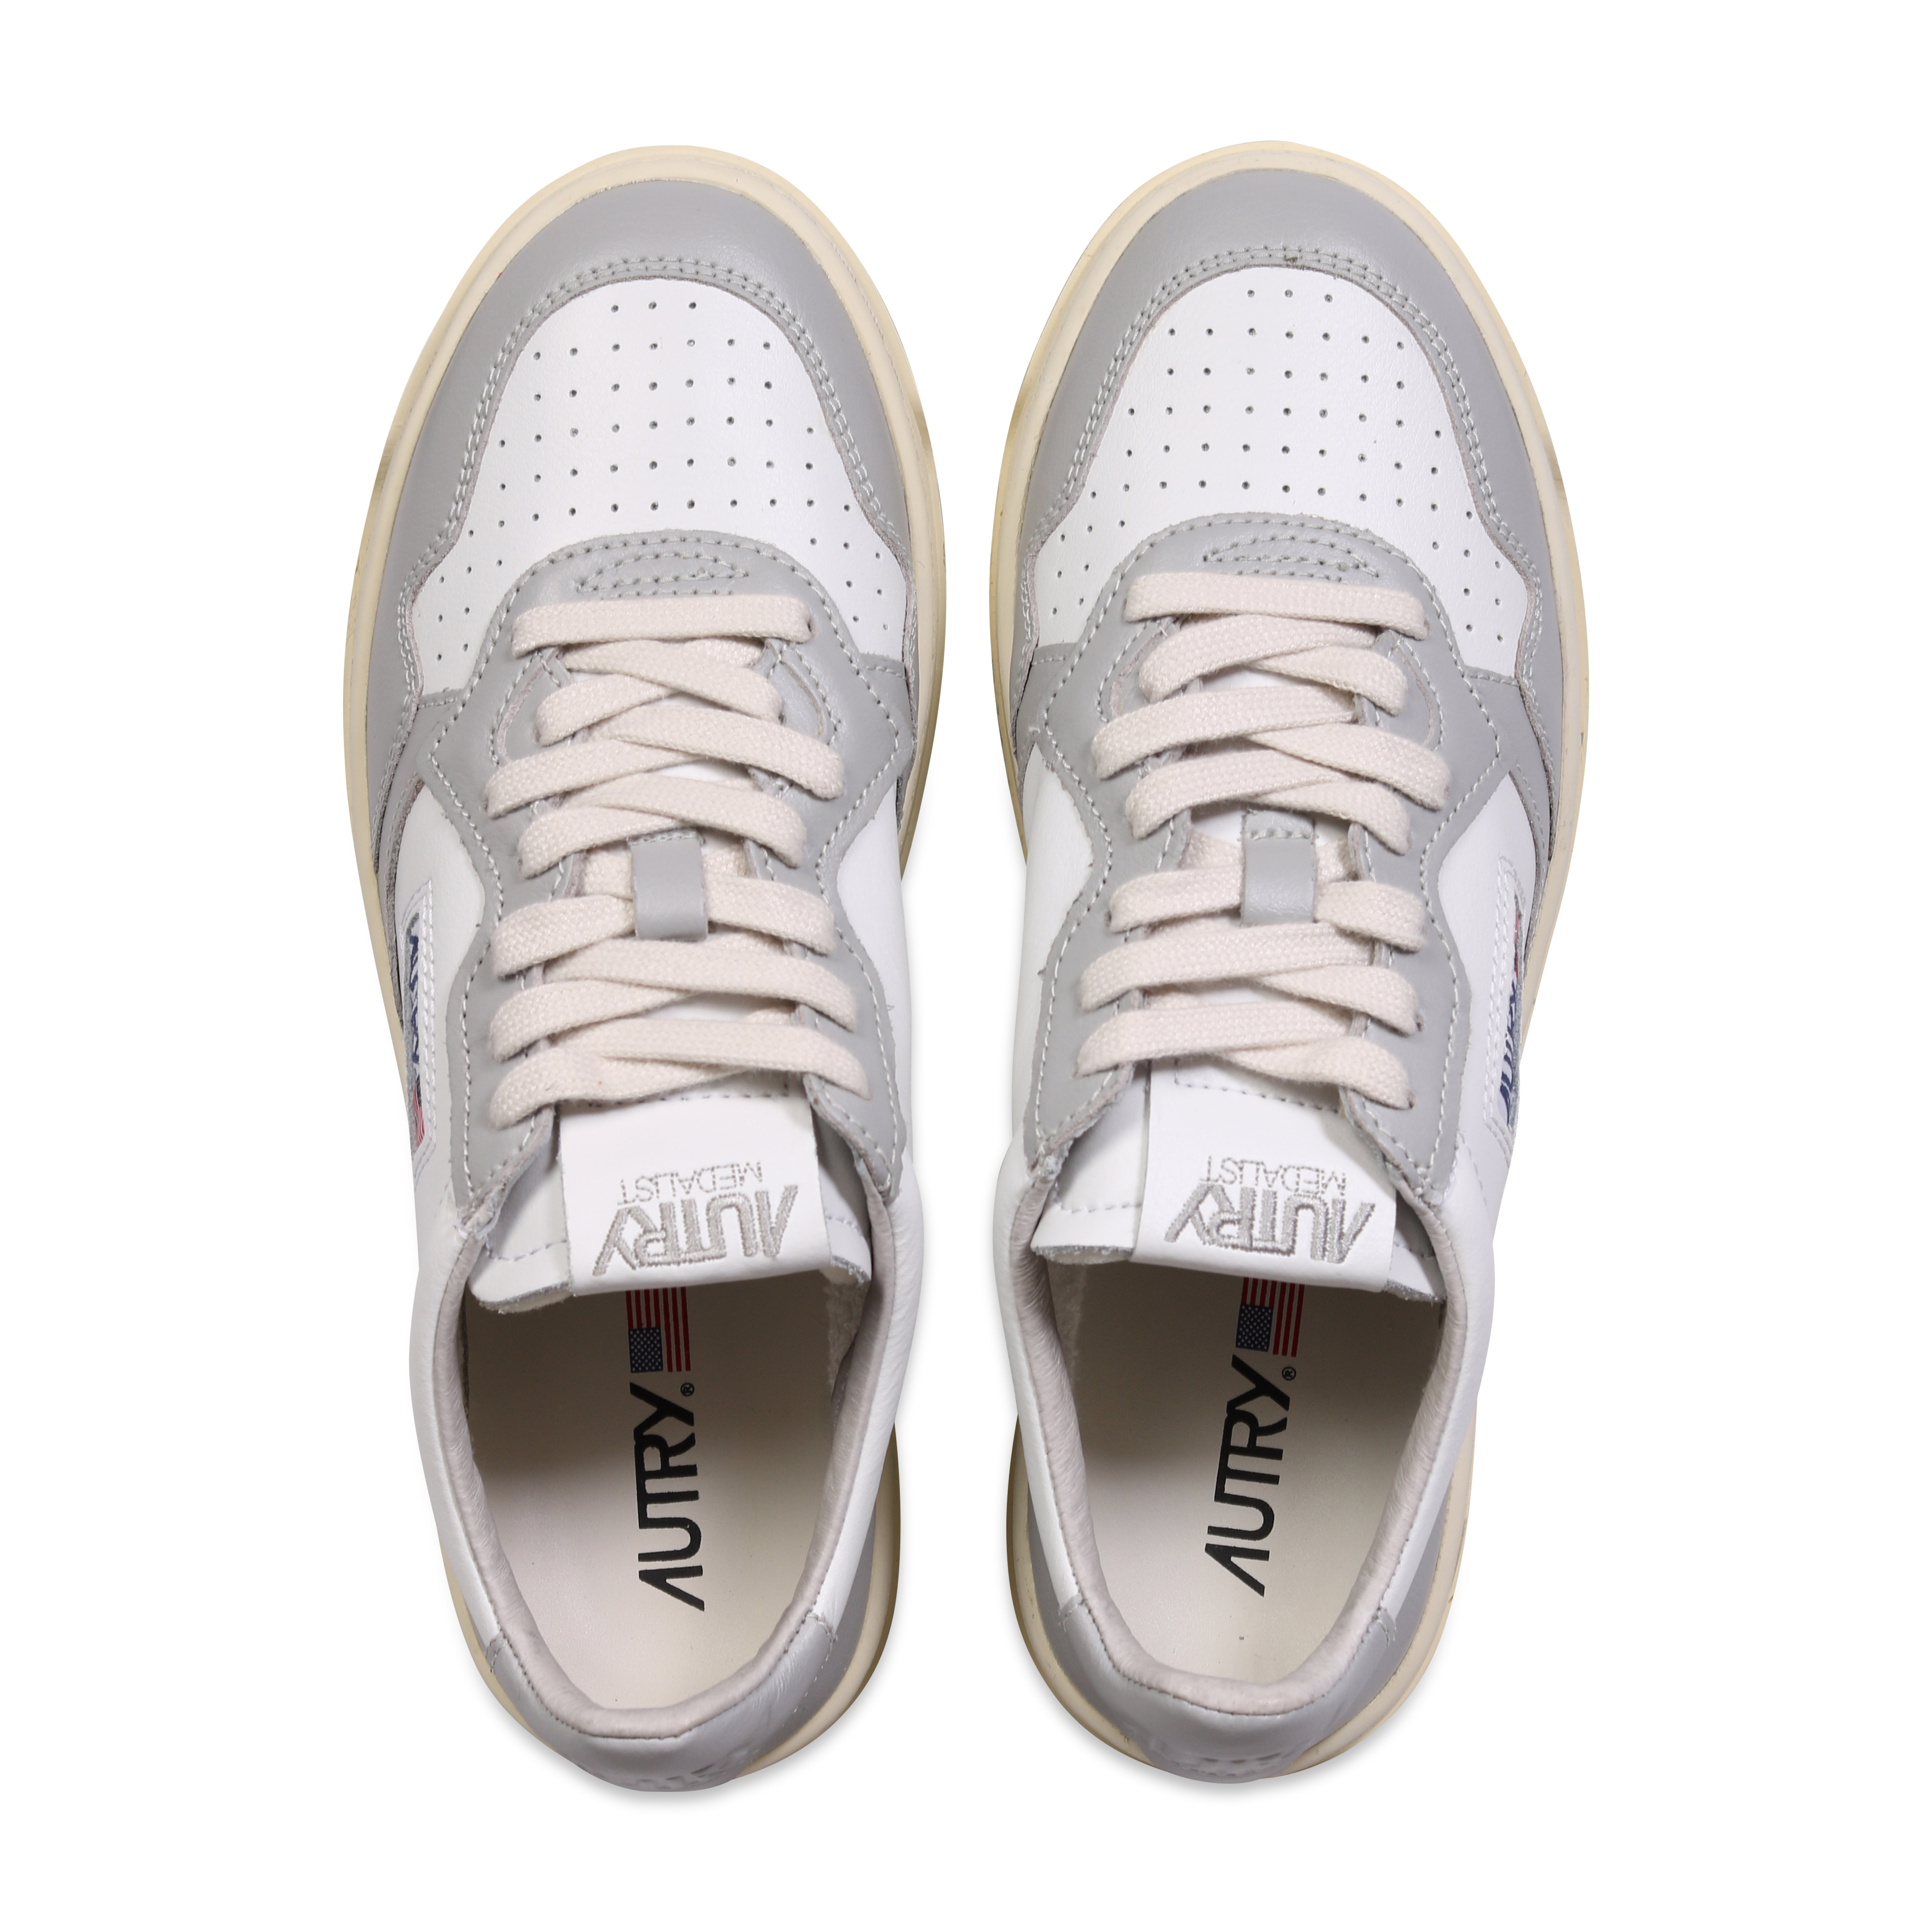 Autry Action Shoes Sneaker White/Grey